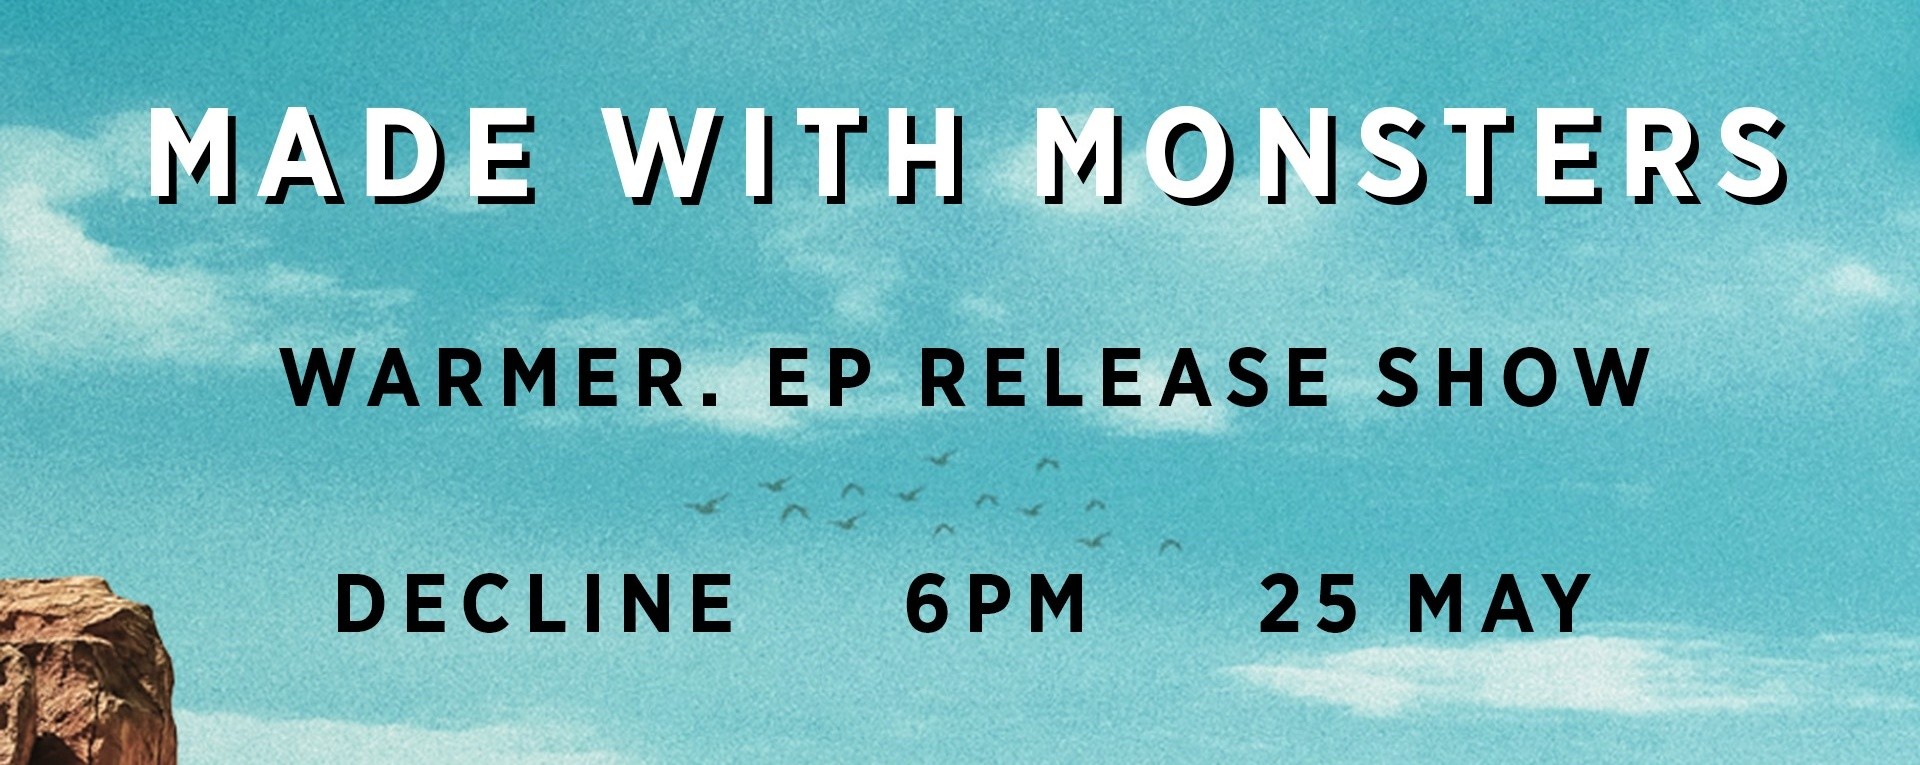 Warmer. EP Release Show by Made with Monsters